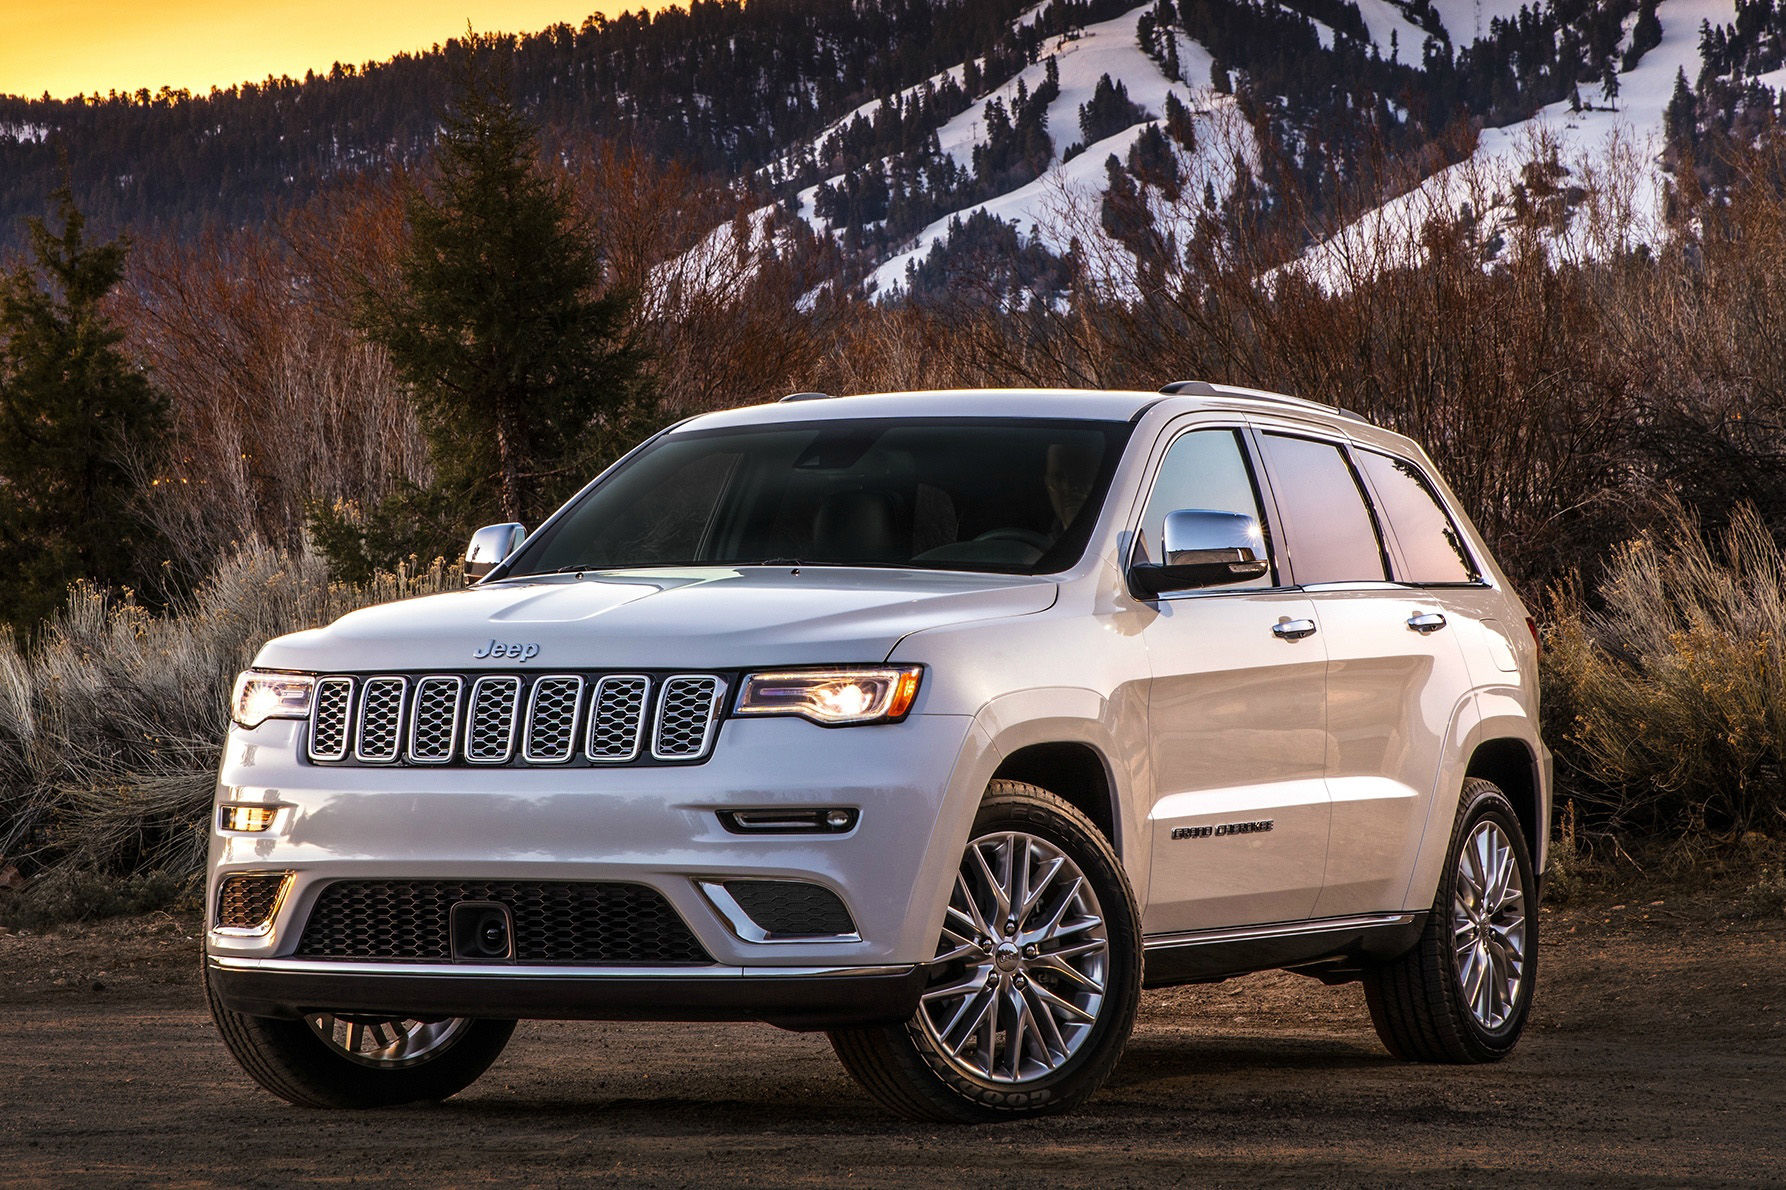 2019 Jeep Grand Cherokee
Lease Deal: $319 per month for 36 months with $3,499 due at signing
(Courtesy Fiat Chrysler Automobiles)